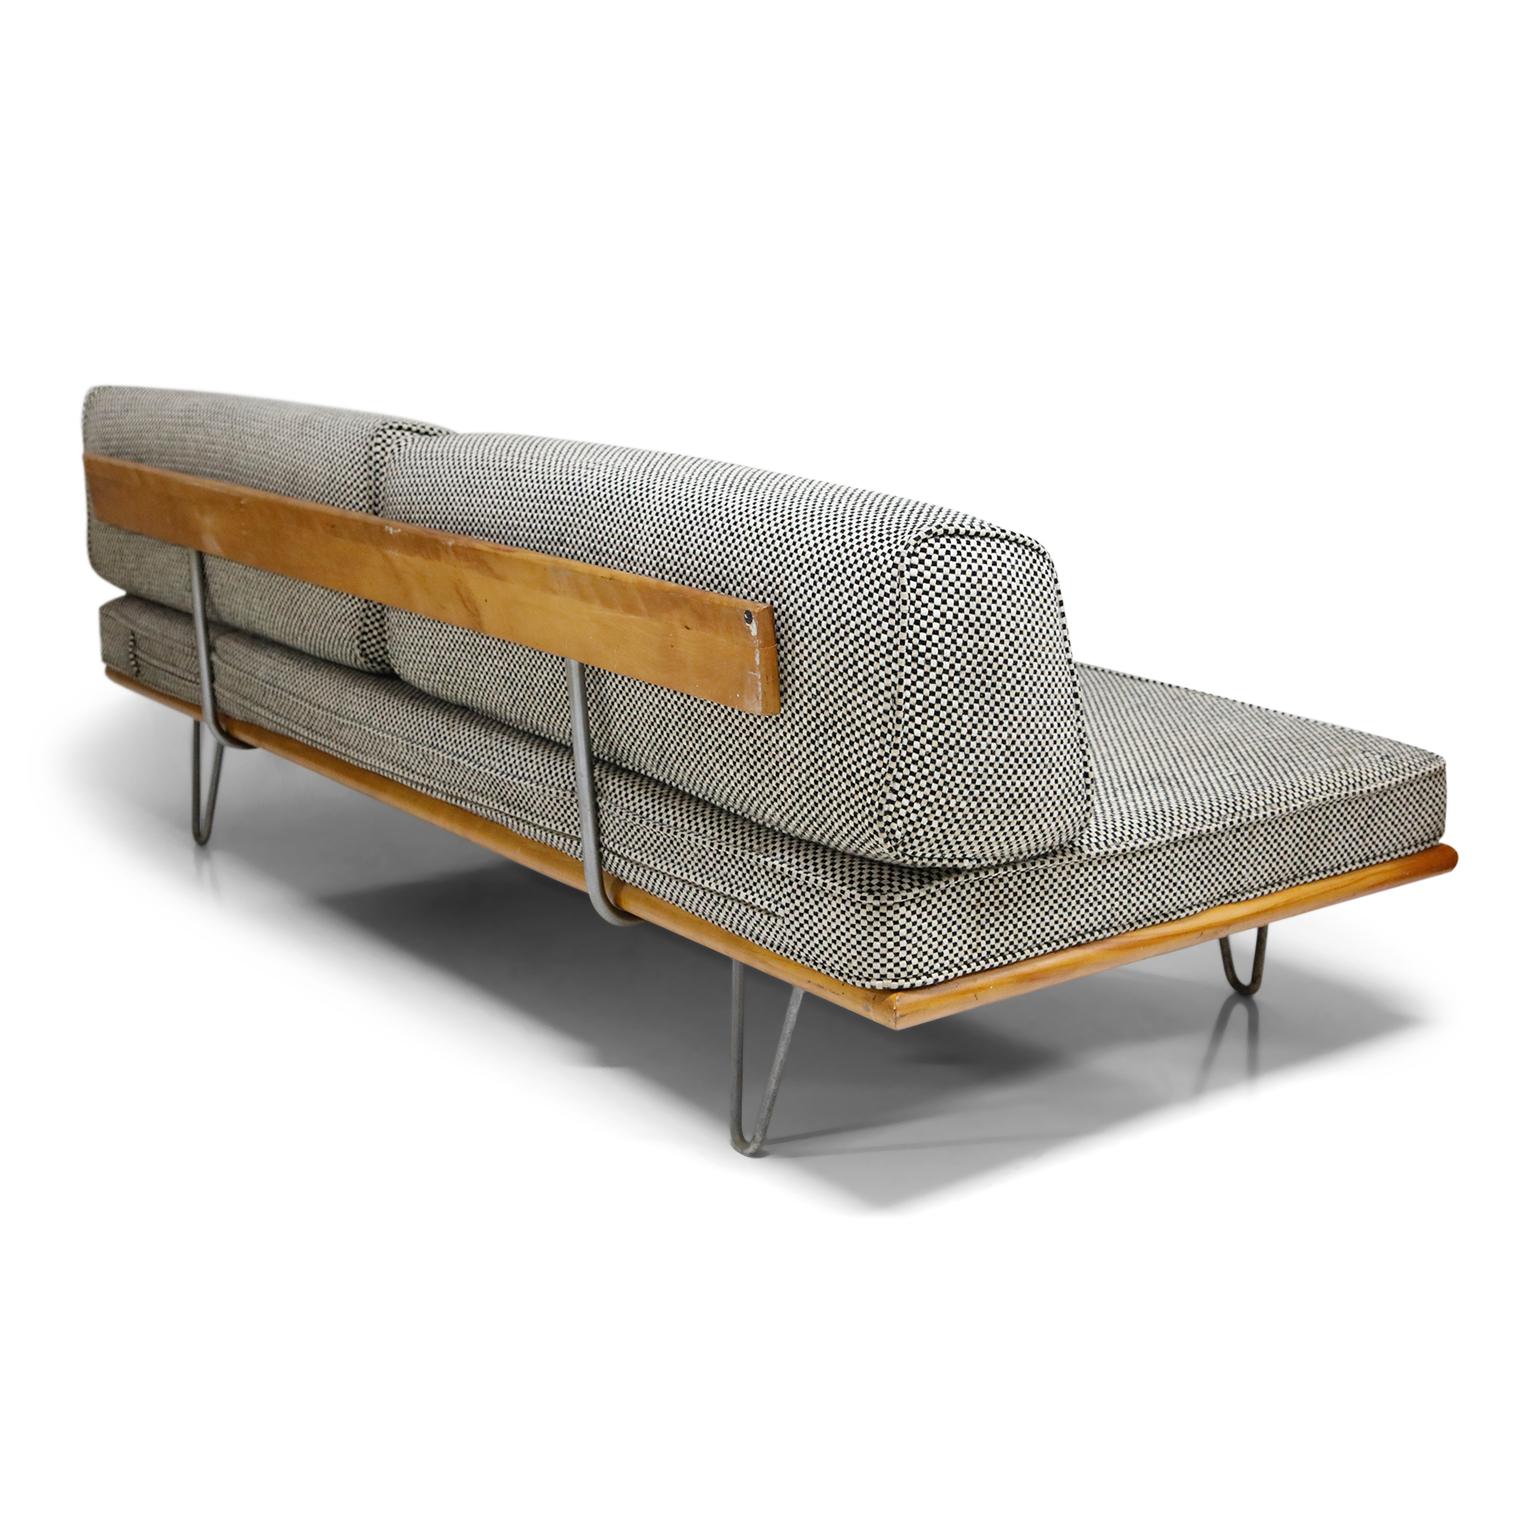 Mid-Century Modern Convertible Daybed Sofa with Hairpin Legs by George Nelson for Herman Miller